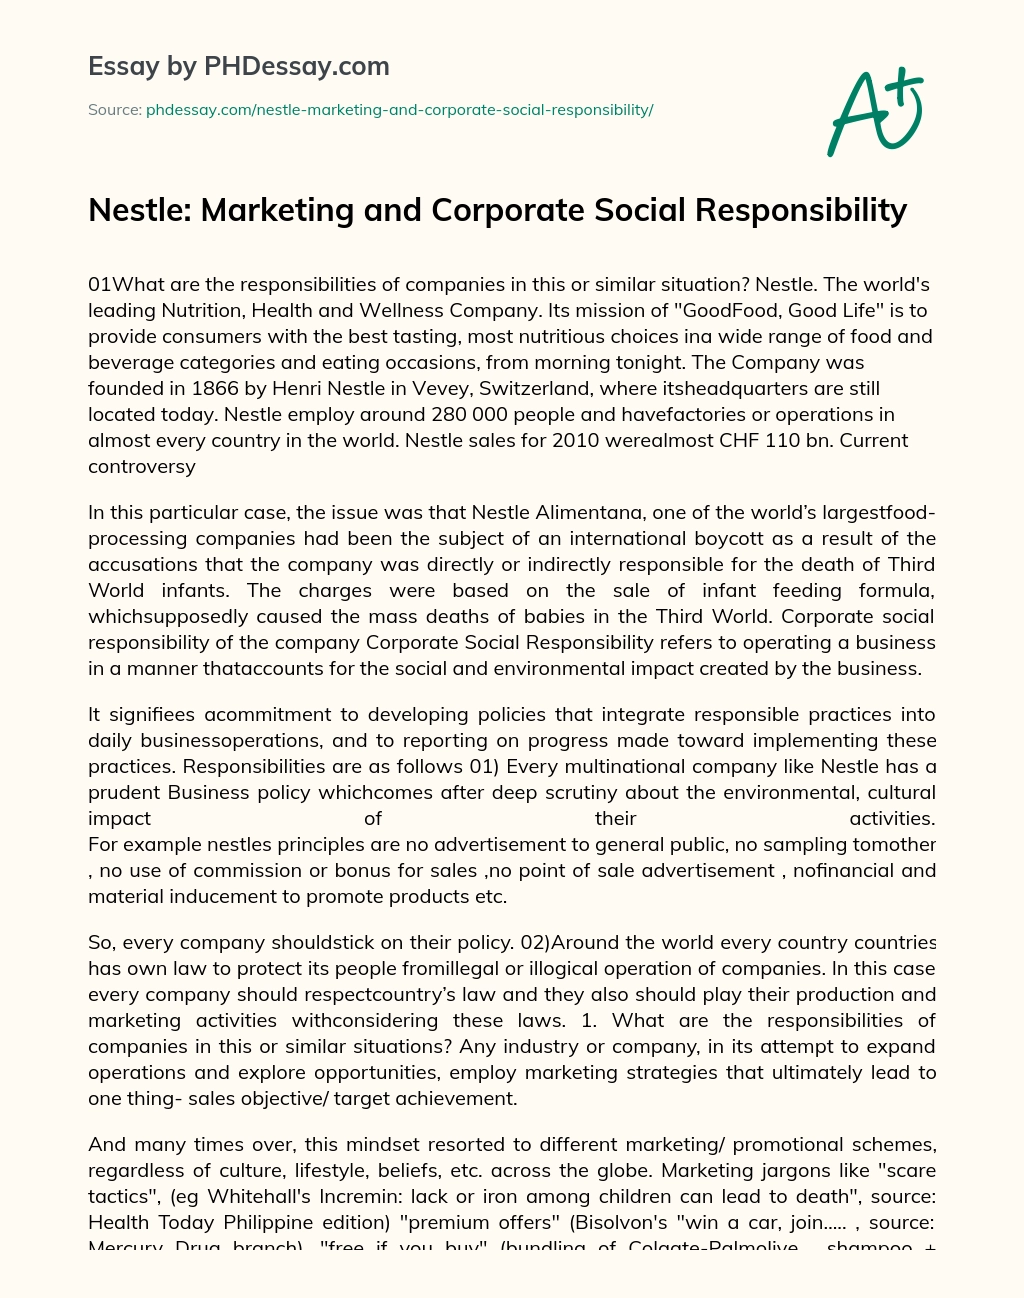 Nestle: Marketing and Corporate Social Responsibility essay